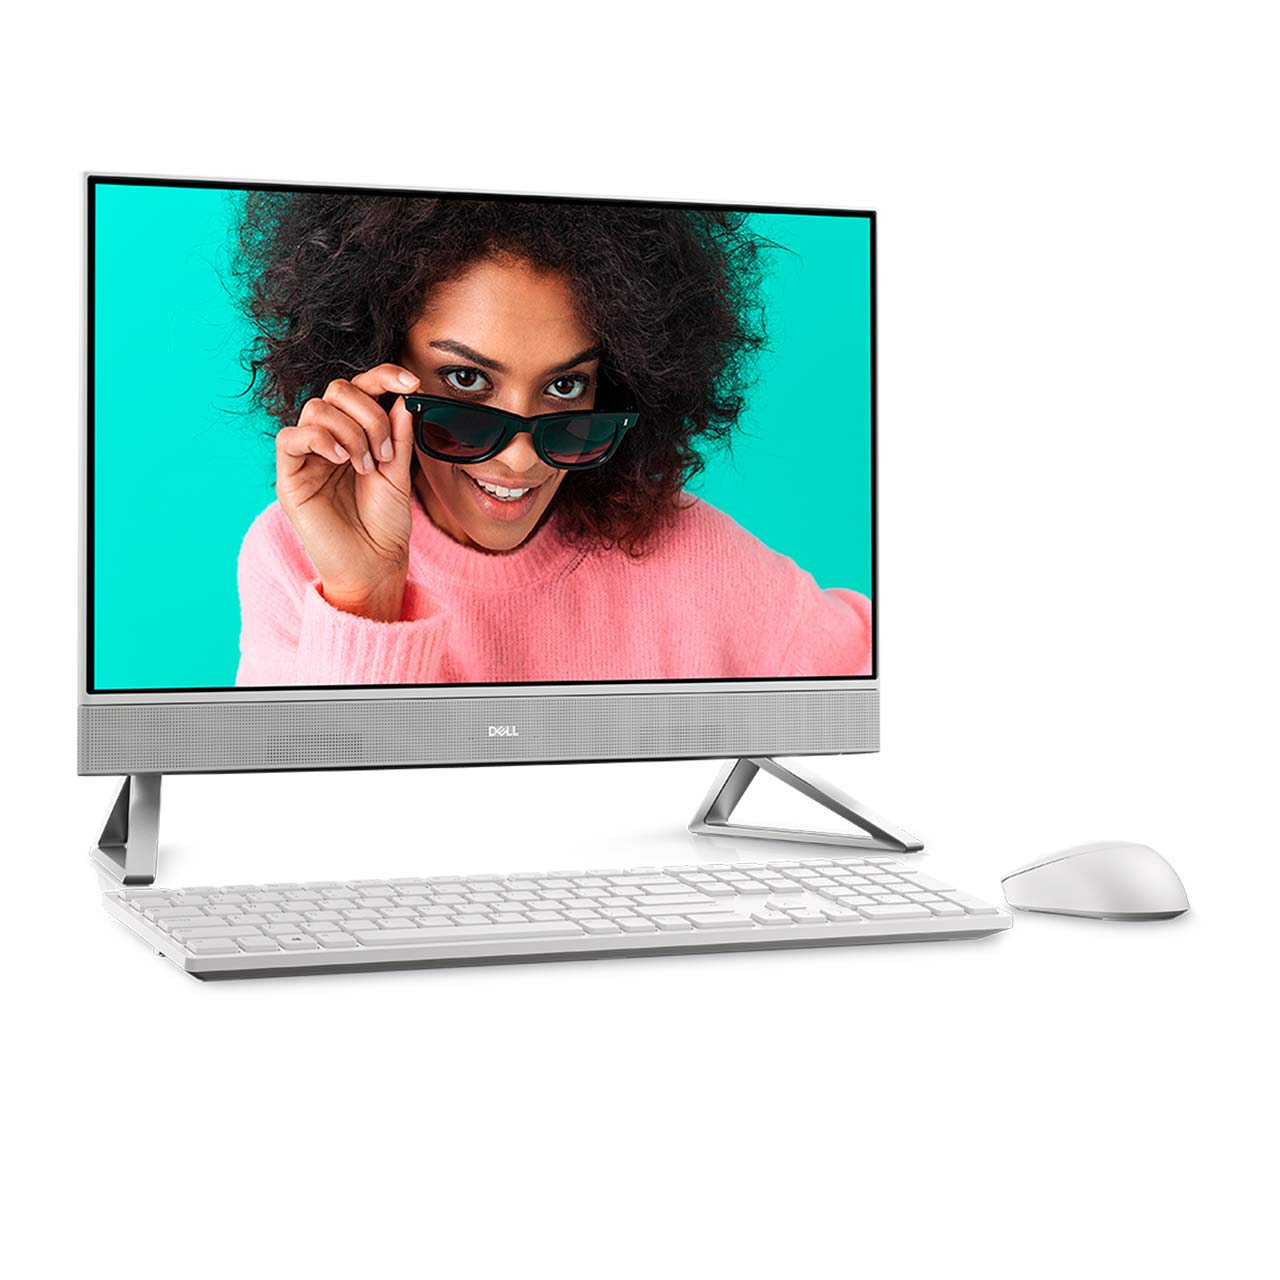 Inspiron 27 7000 (7710) All-in-One